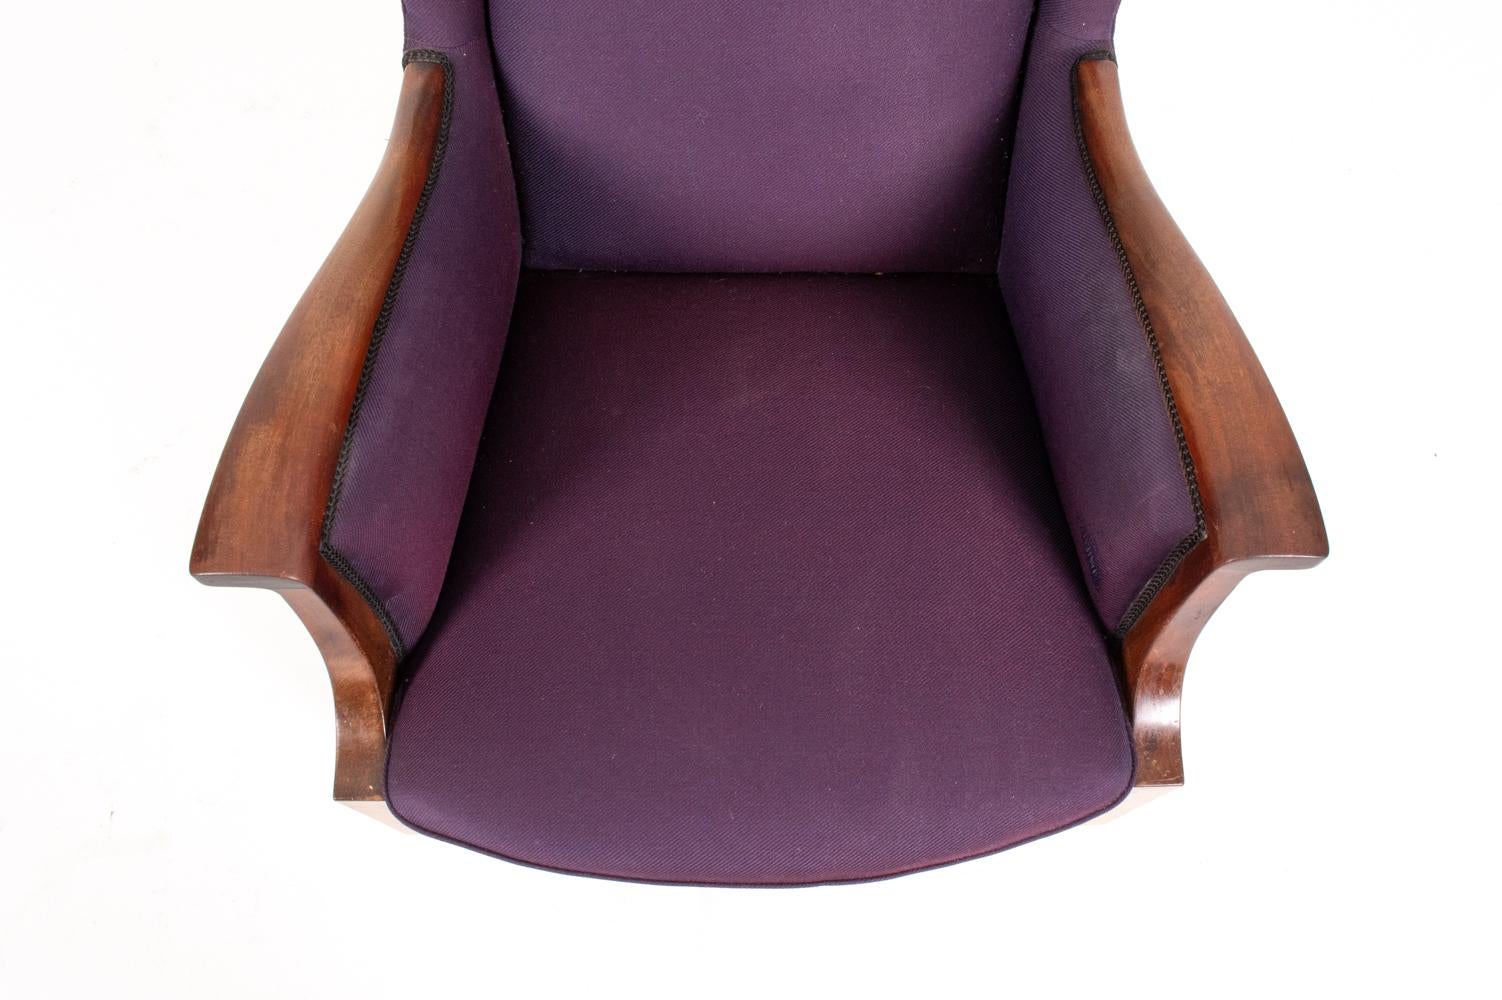 Frits Henningsen Danish Wingback Lounge Chair, c. 1940's  In Good Condition For Sale In Norwalk, CT